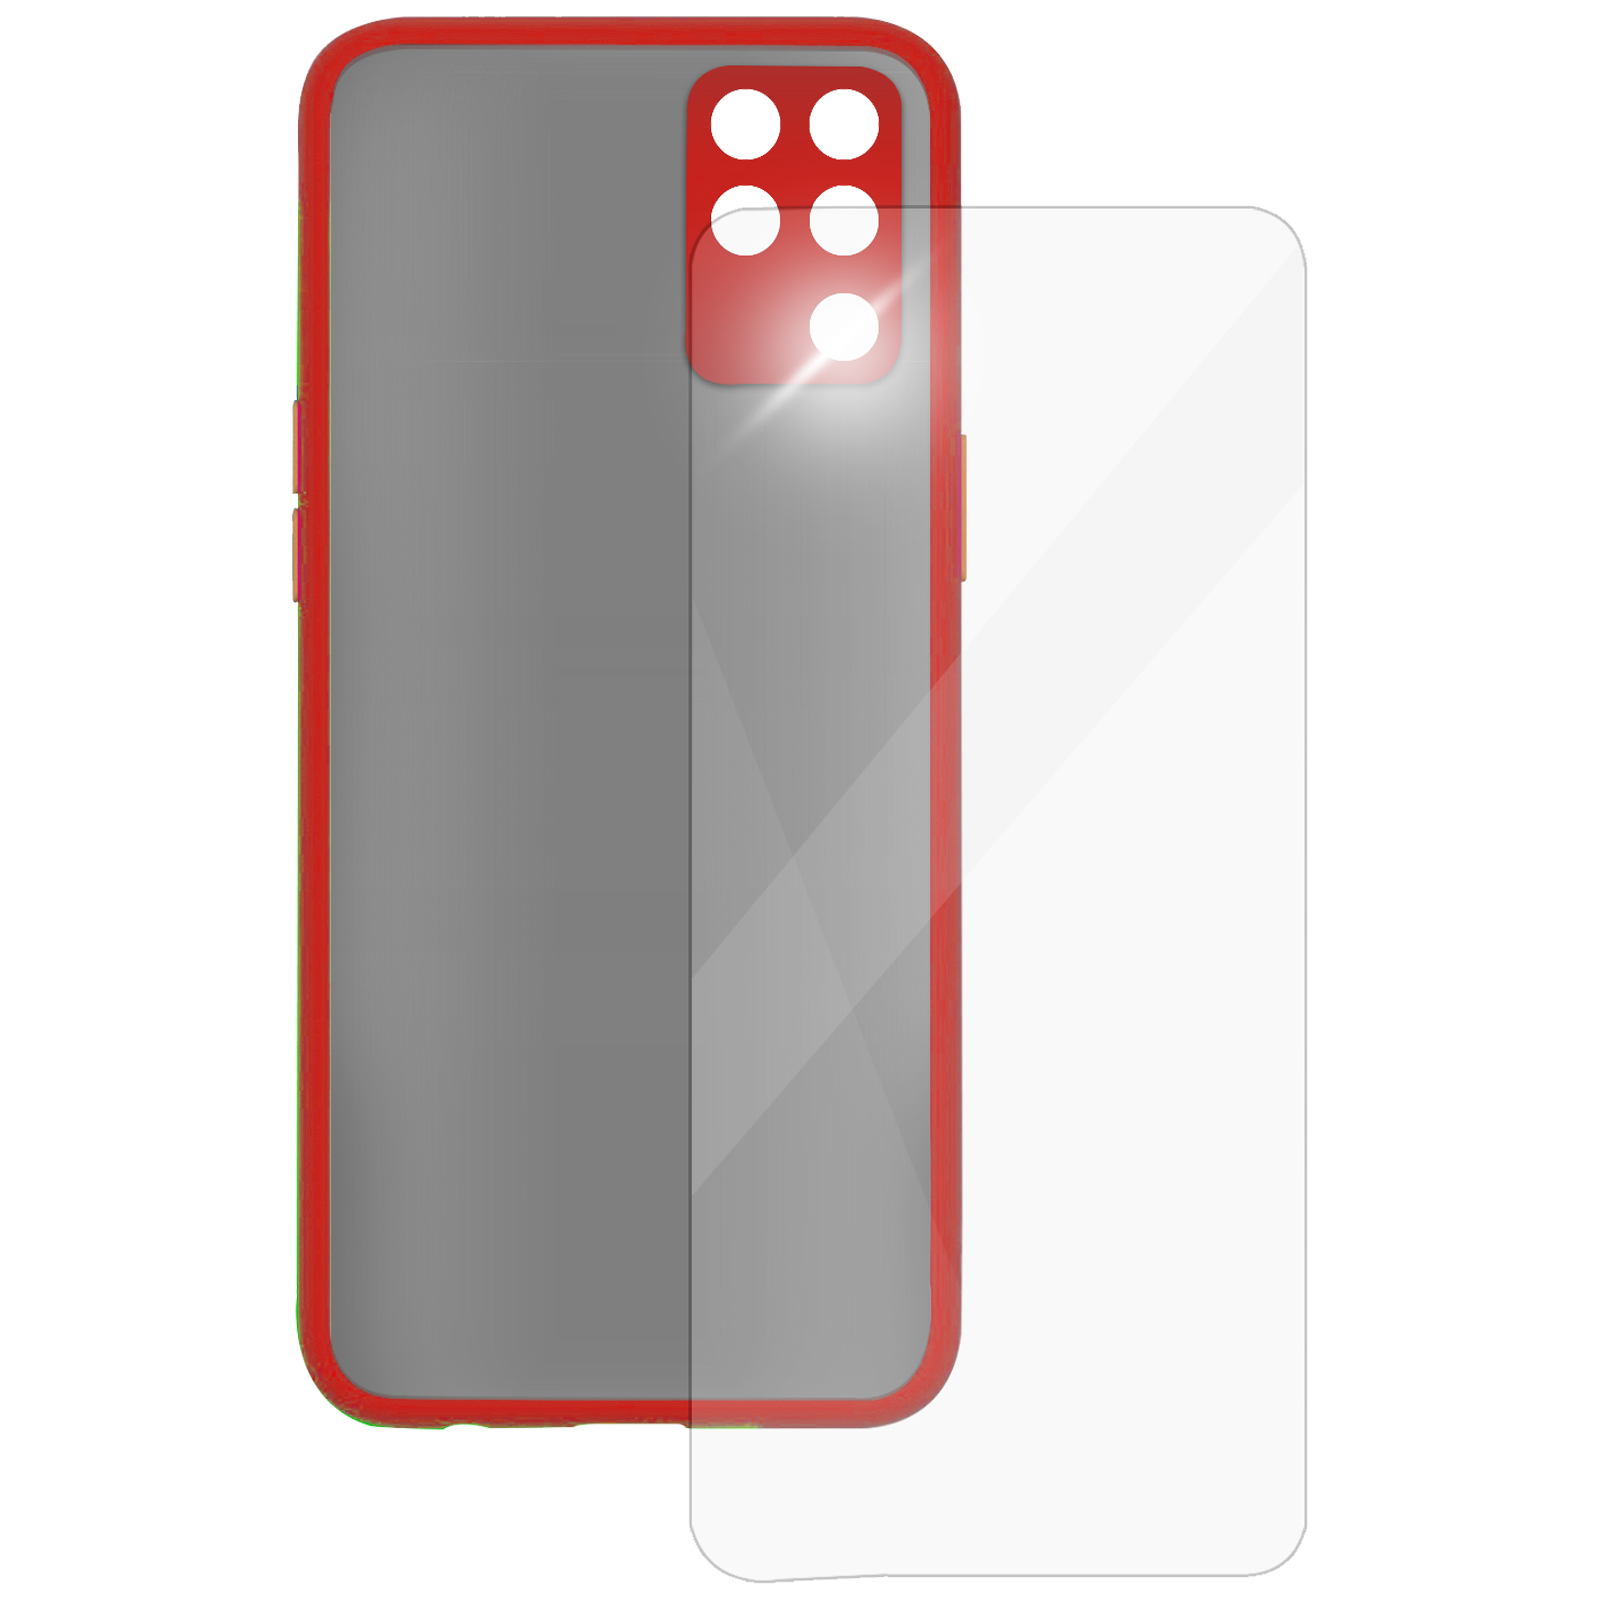 Arrow Camera Duplex Back Case and Screen Protector Bundle For Oppo F19 Pro (Ultra Transparent Visibility, AR-985, Red)_2